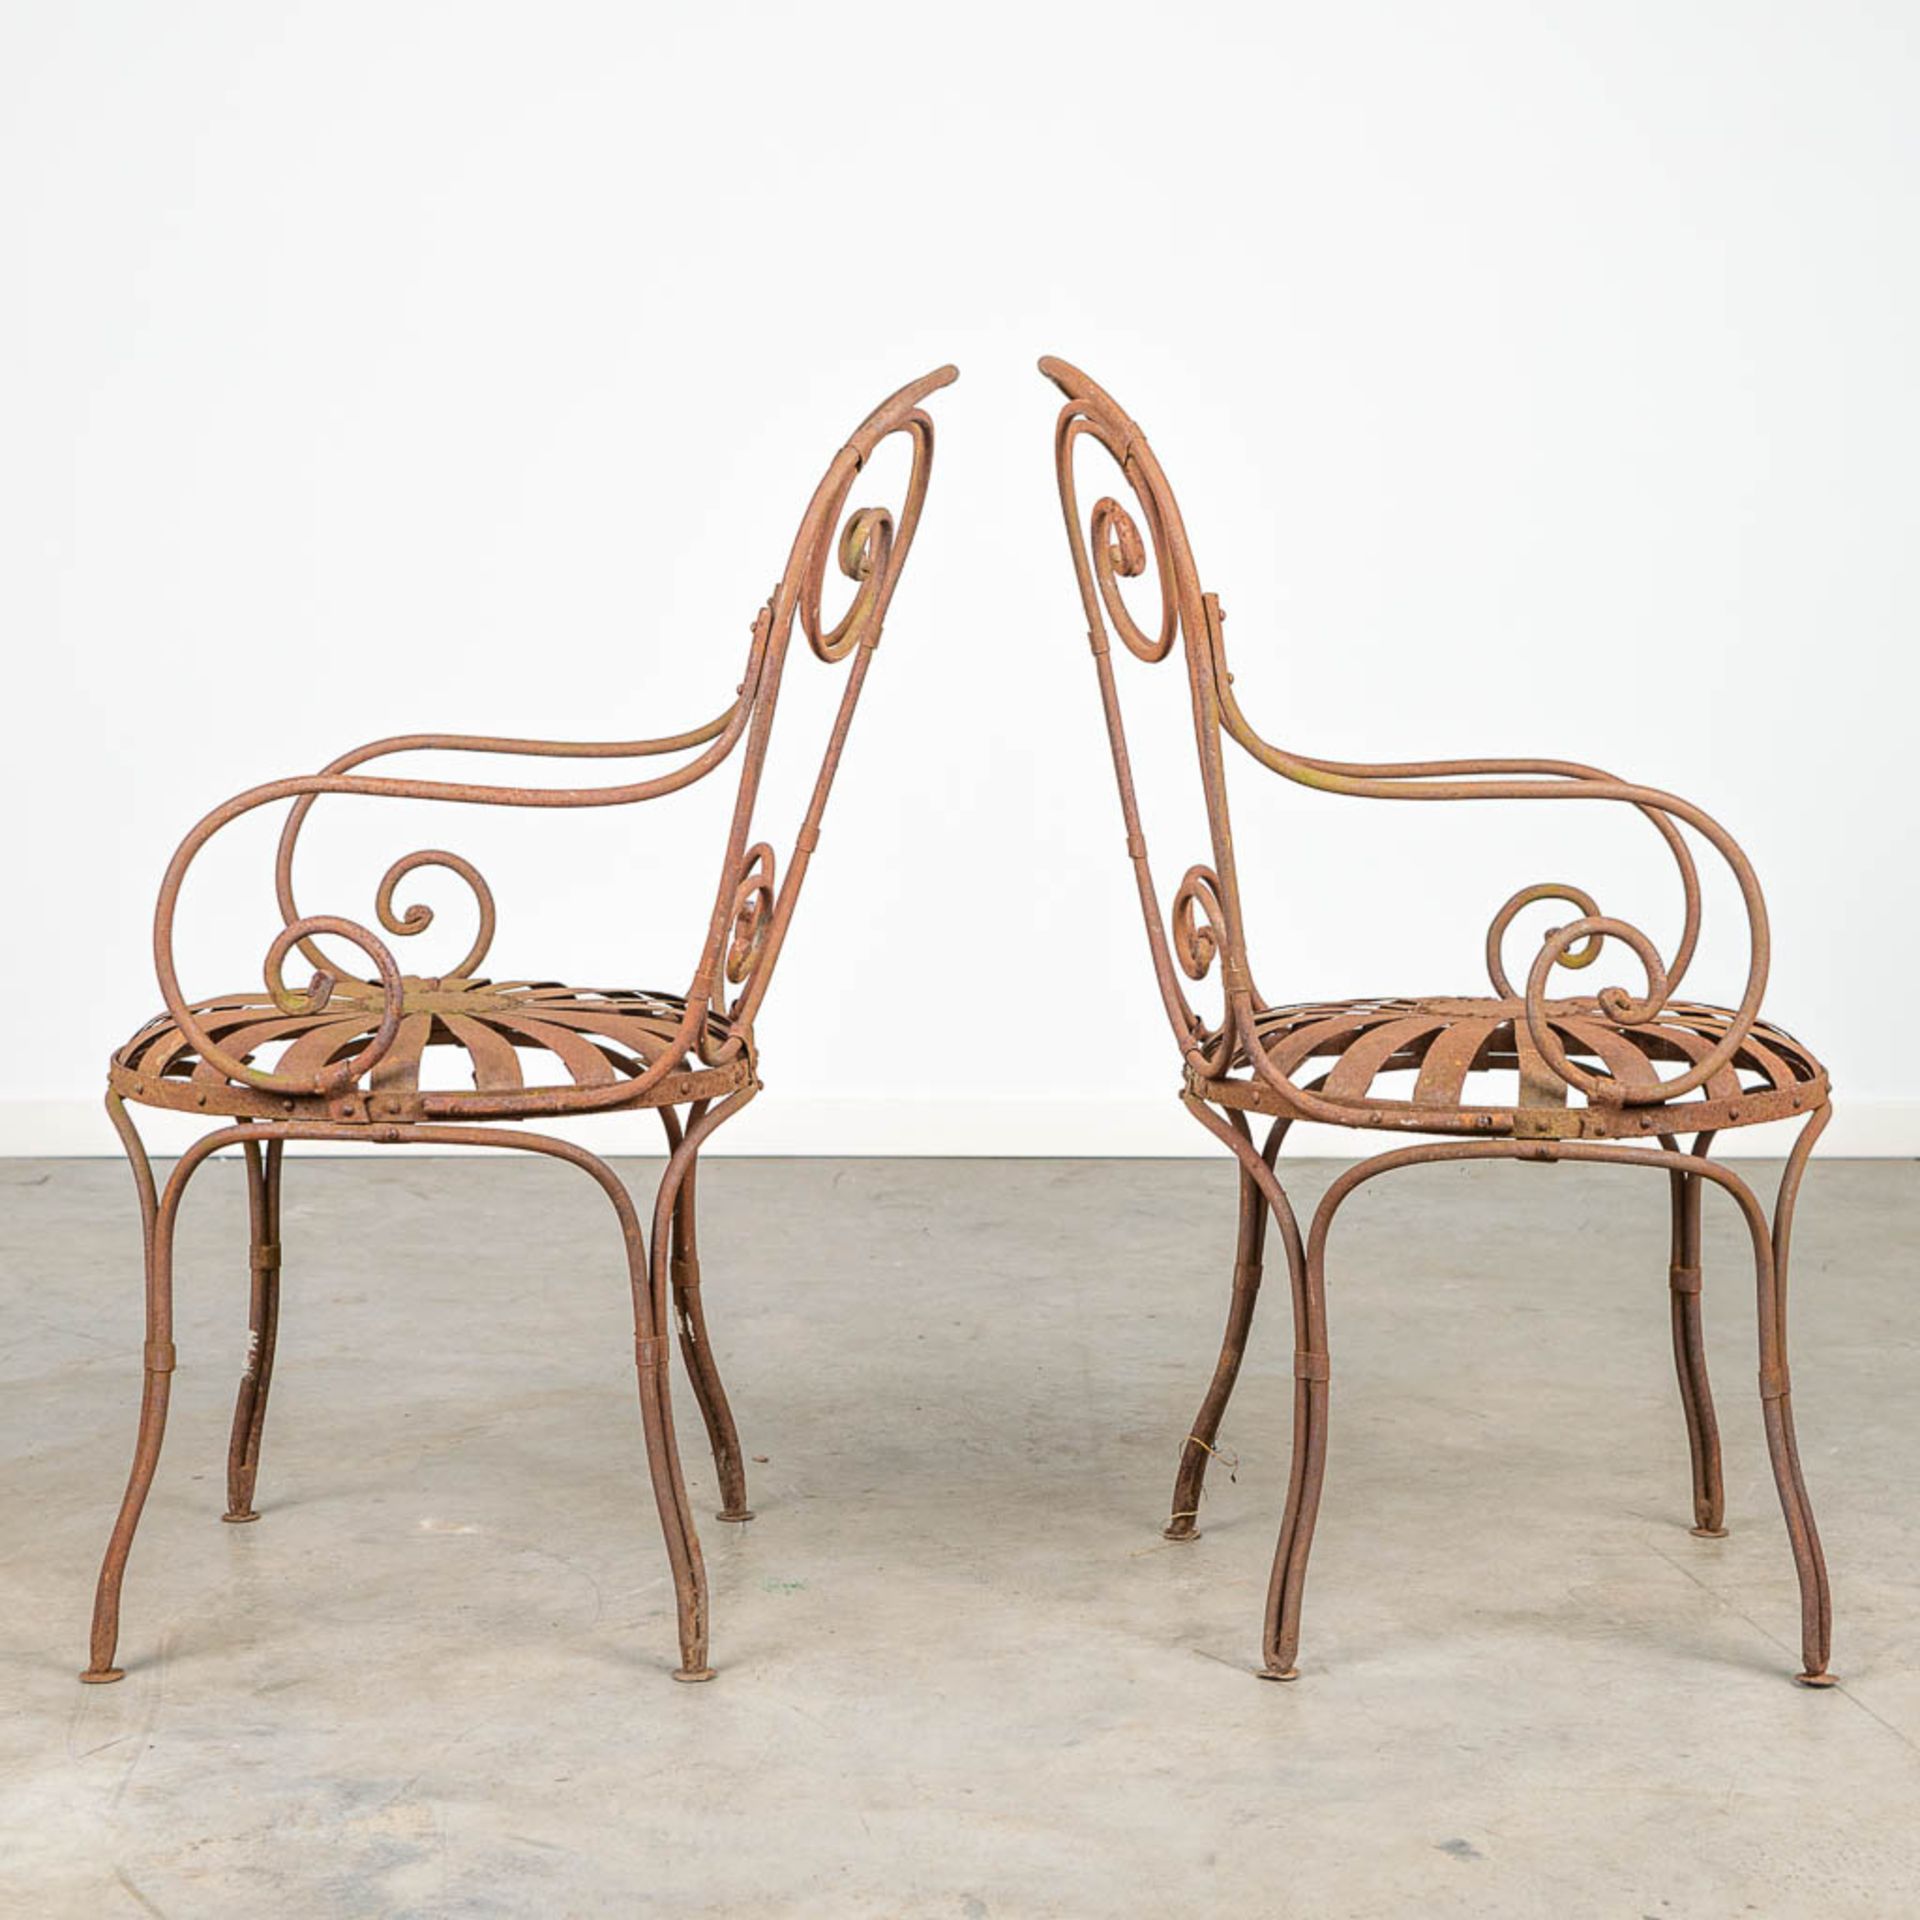 A pair of garden chairs made of wrought iron. - Image 5 of 6